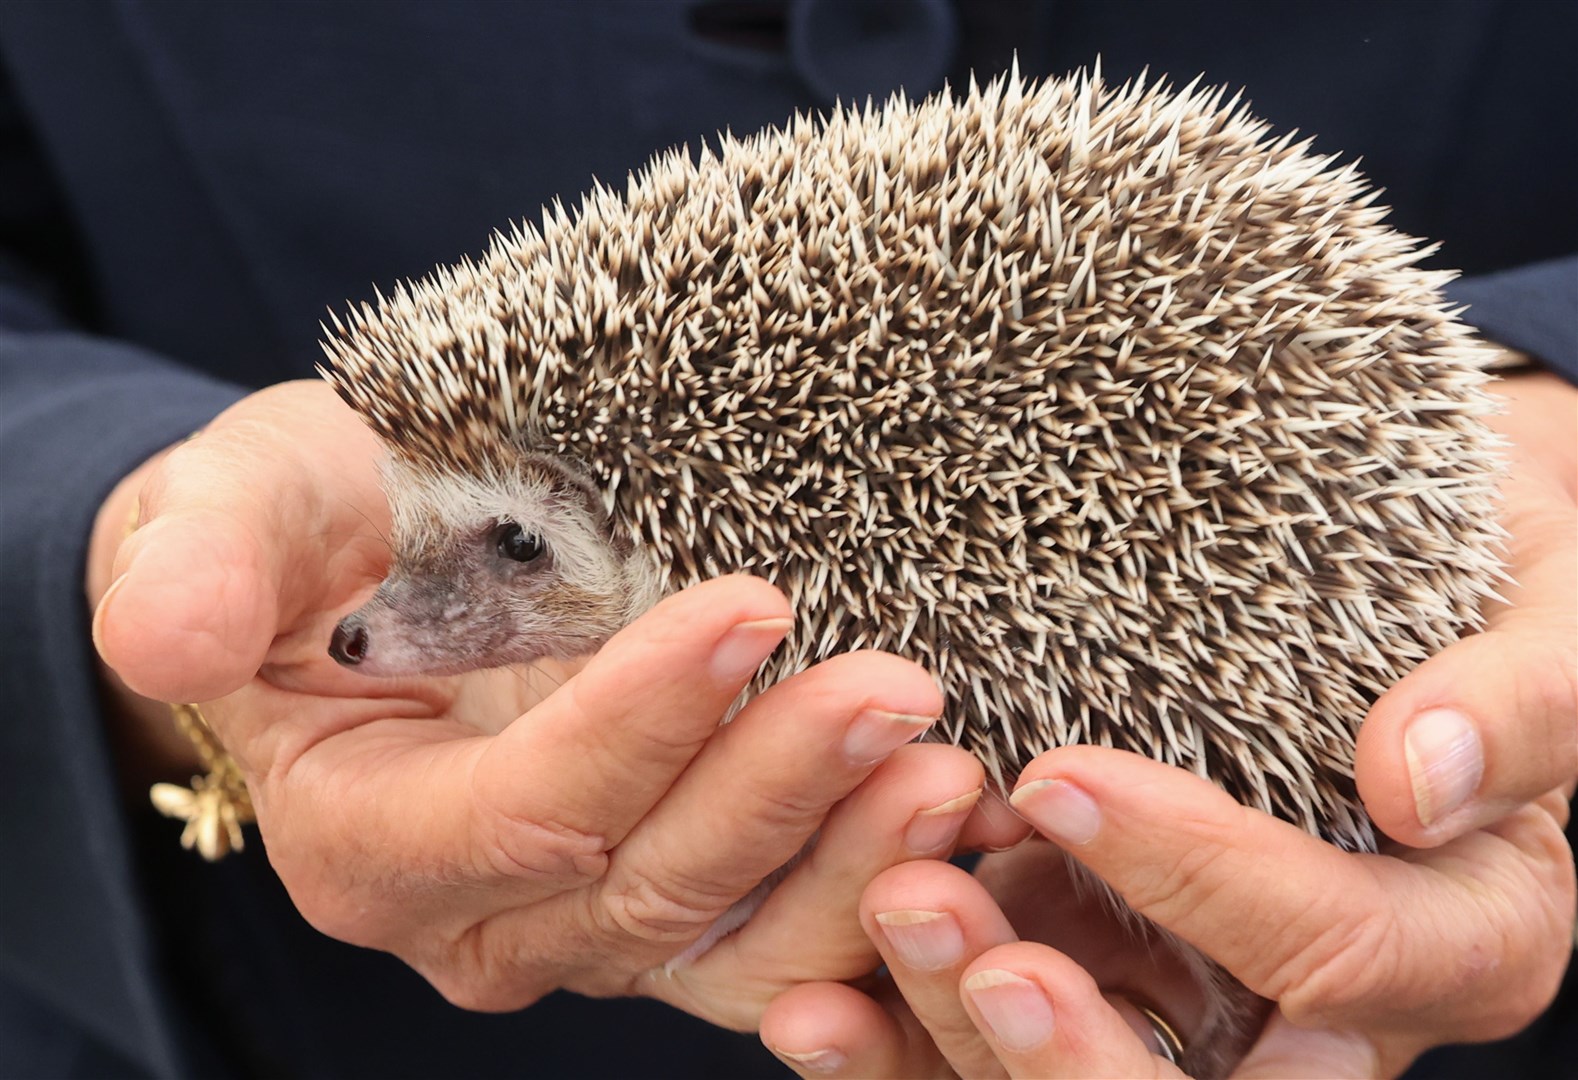 The study found that 25% of hedgehog mortalities in the UK were due to roads (Chris Jackson/PA)